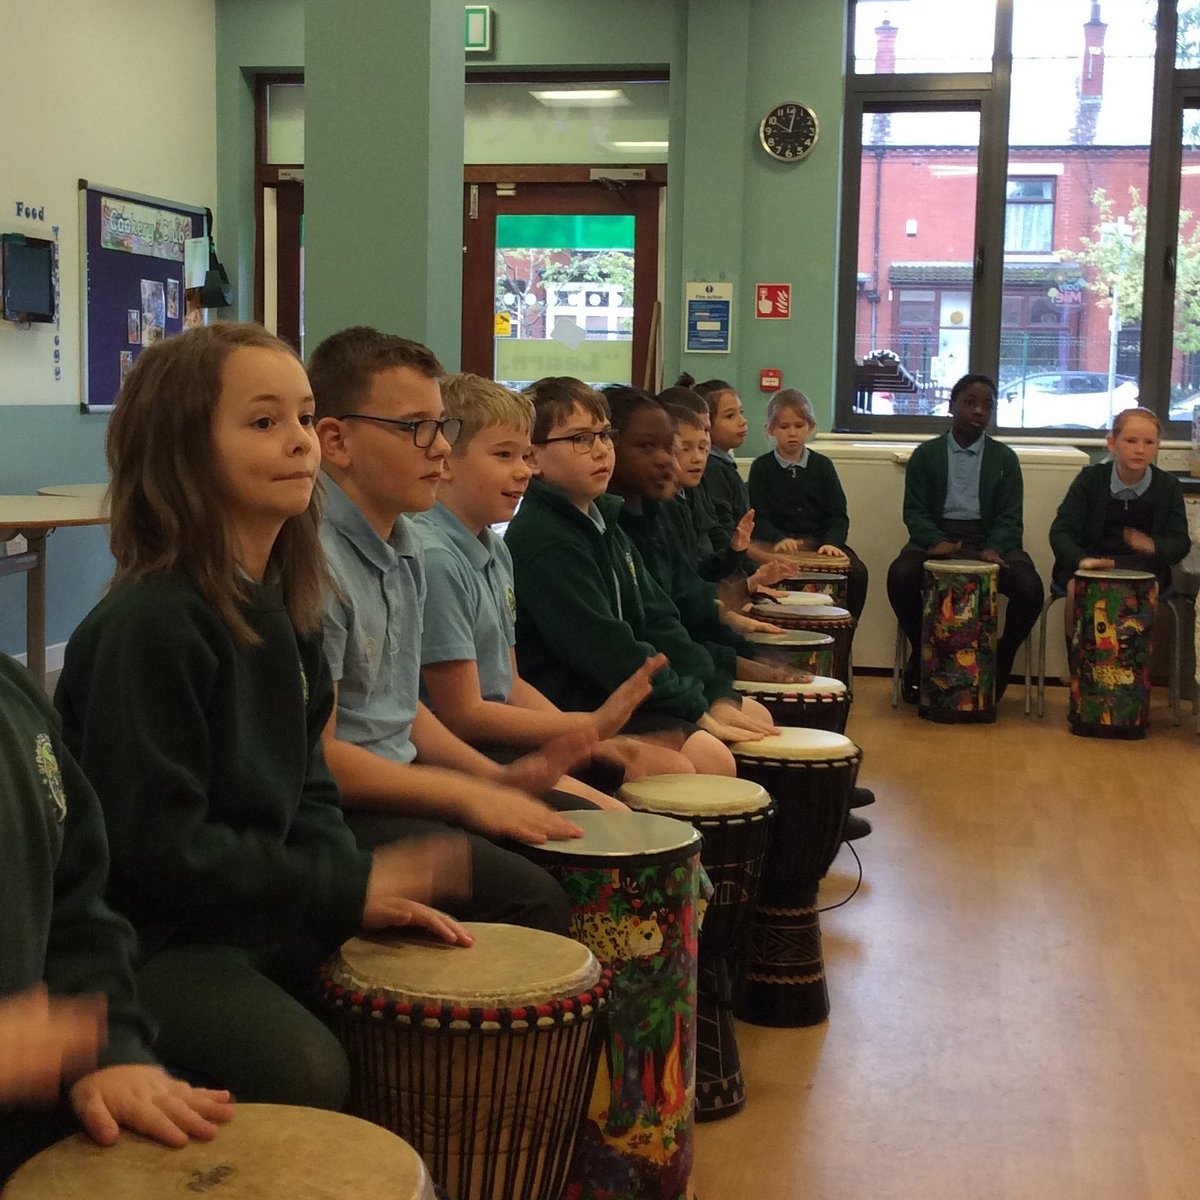 Year 4 enjoyed learning a new song yesterday during their African Drumming lesson! 🎶 @stpetersfarn @BoltonMusicCent #africandrumming